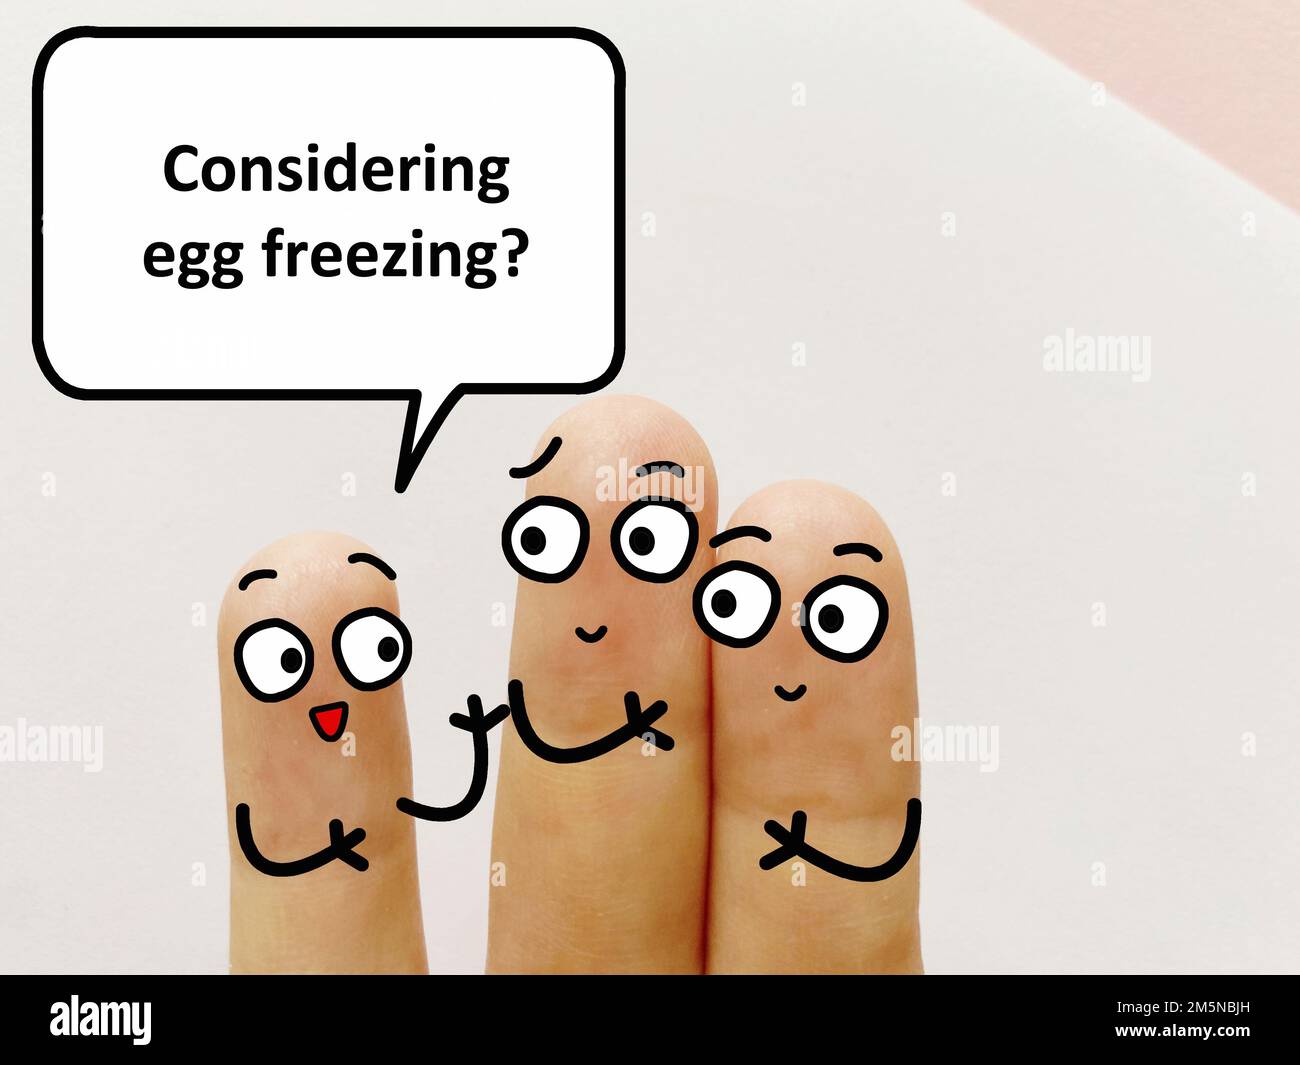 Three fingers are decorated as three person. One of them is asking if they are considering egg freezing. Stock Photo